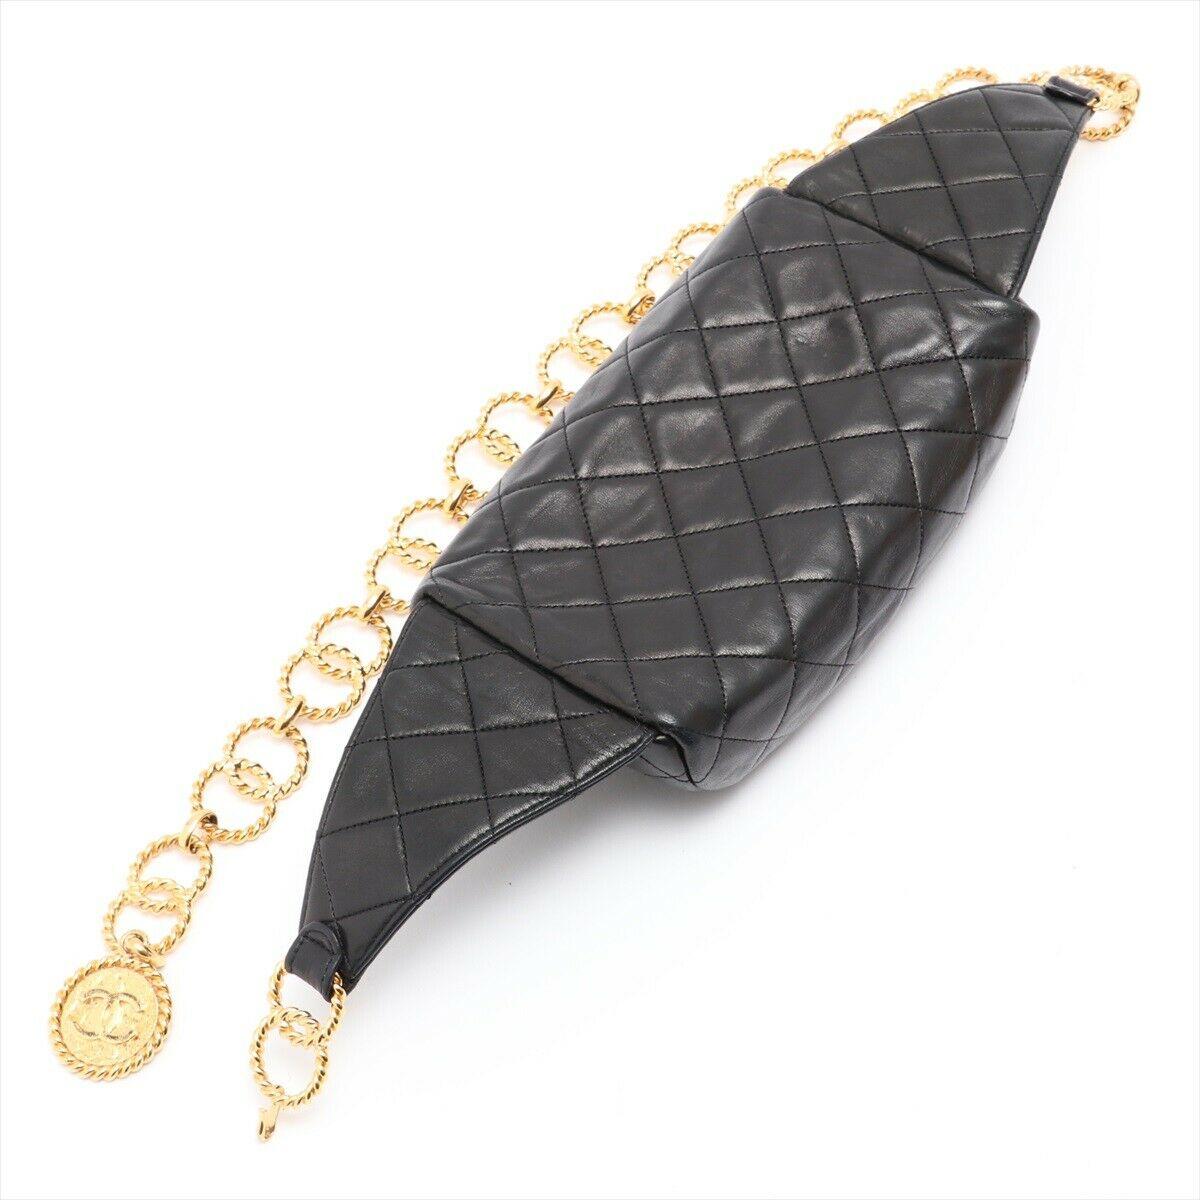 Chanel Vintage Black Lambskin Quilted Medallion Fanny Pack Waist Belt Bag Rare In Good Condition For Sale In Miami, FL